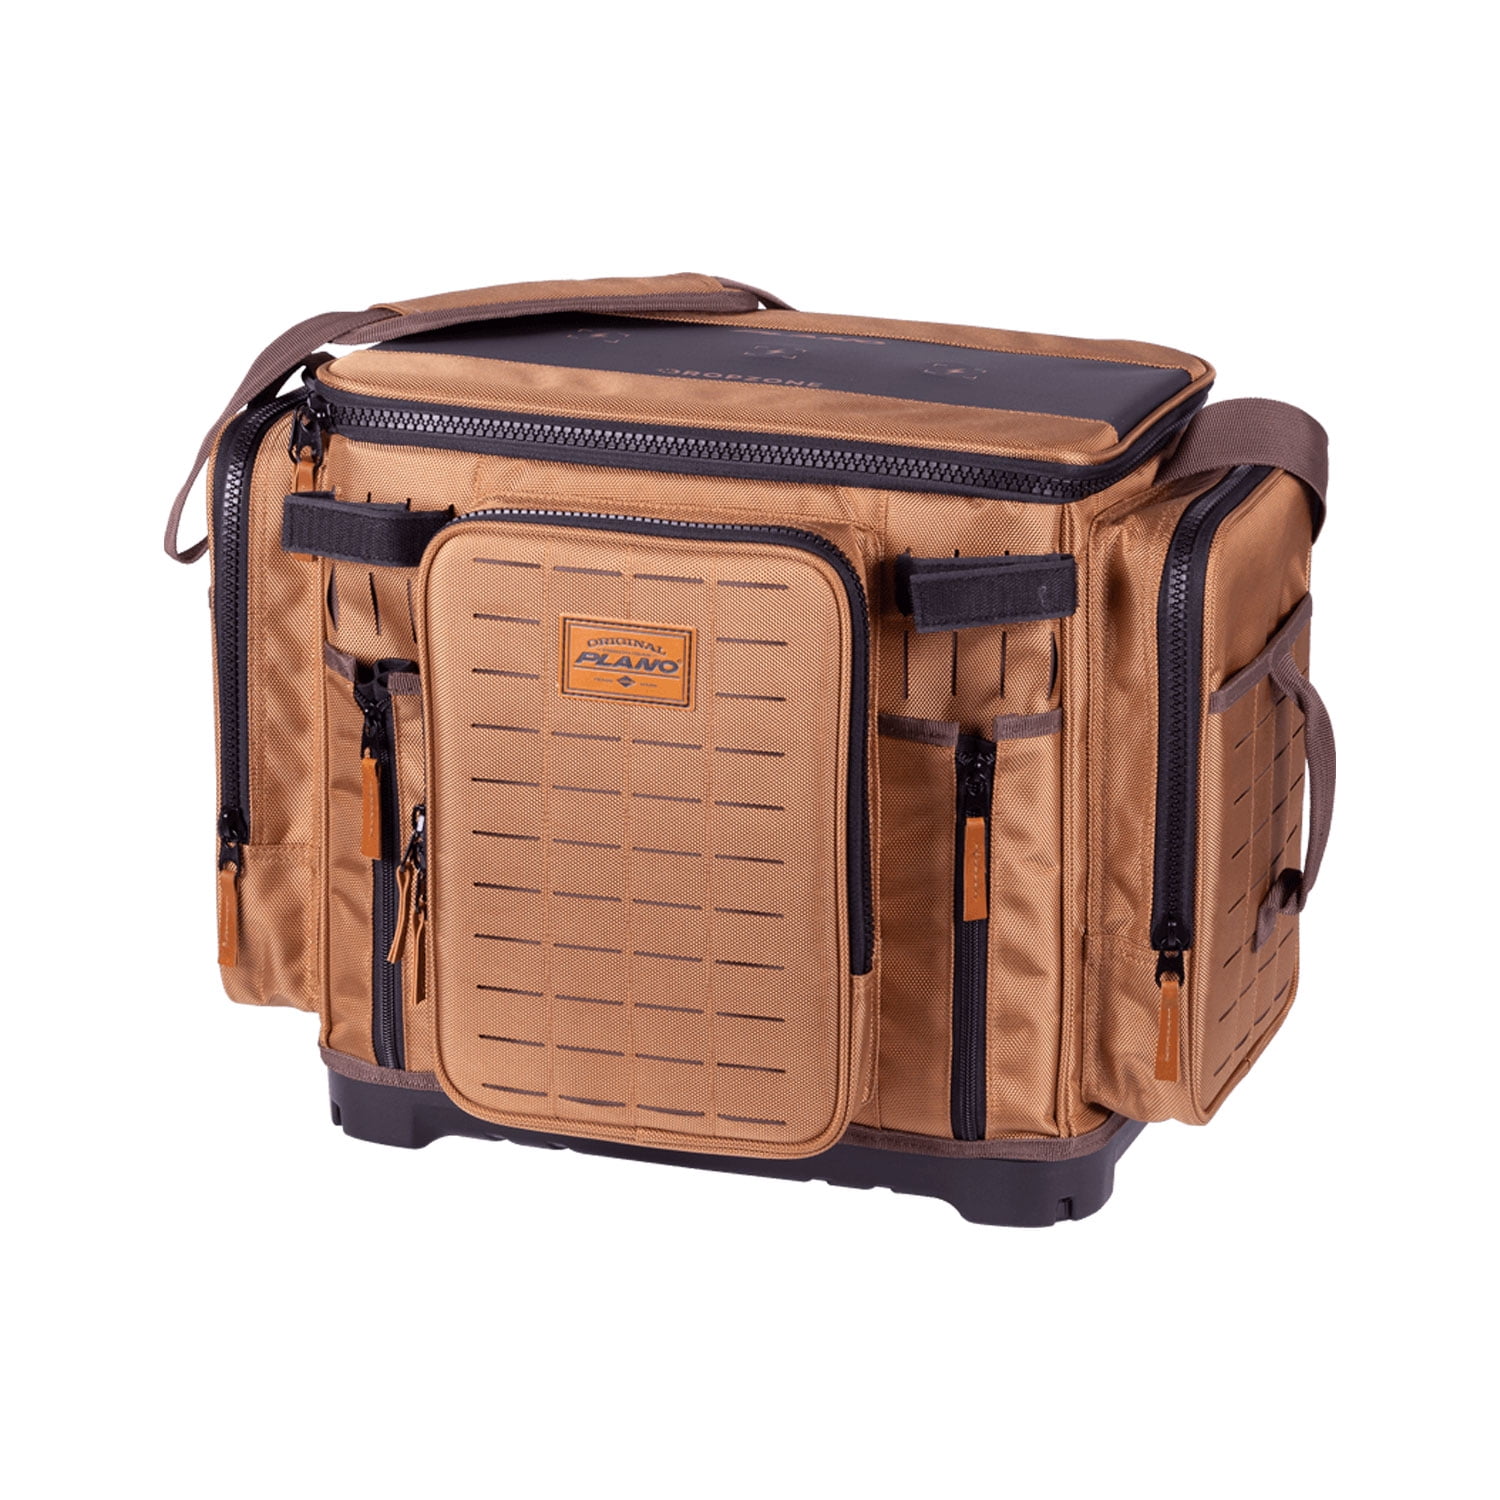 Plano Guide Series 3700 XL Tackle Bag, Includes 10 StowAway Boxes 